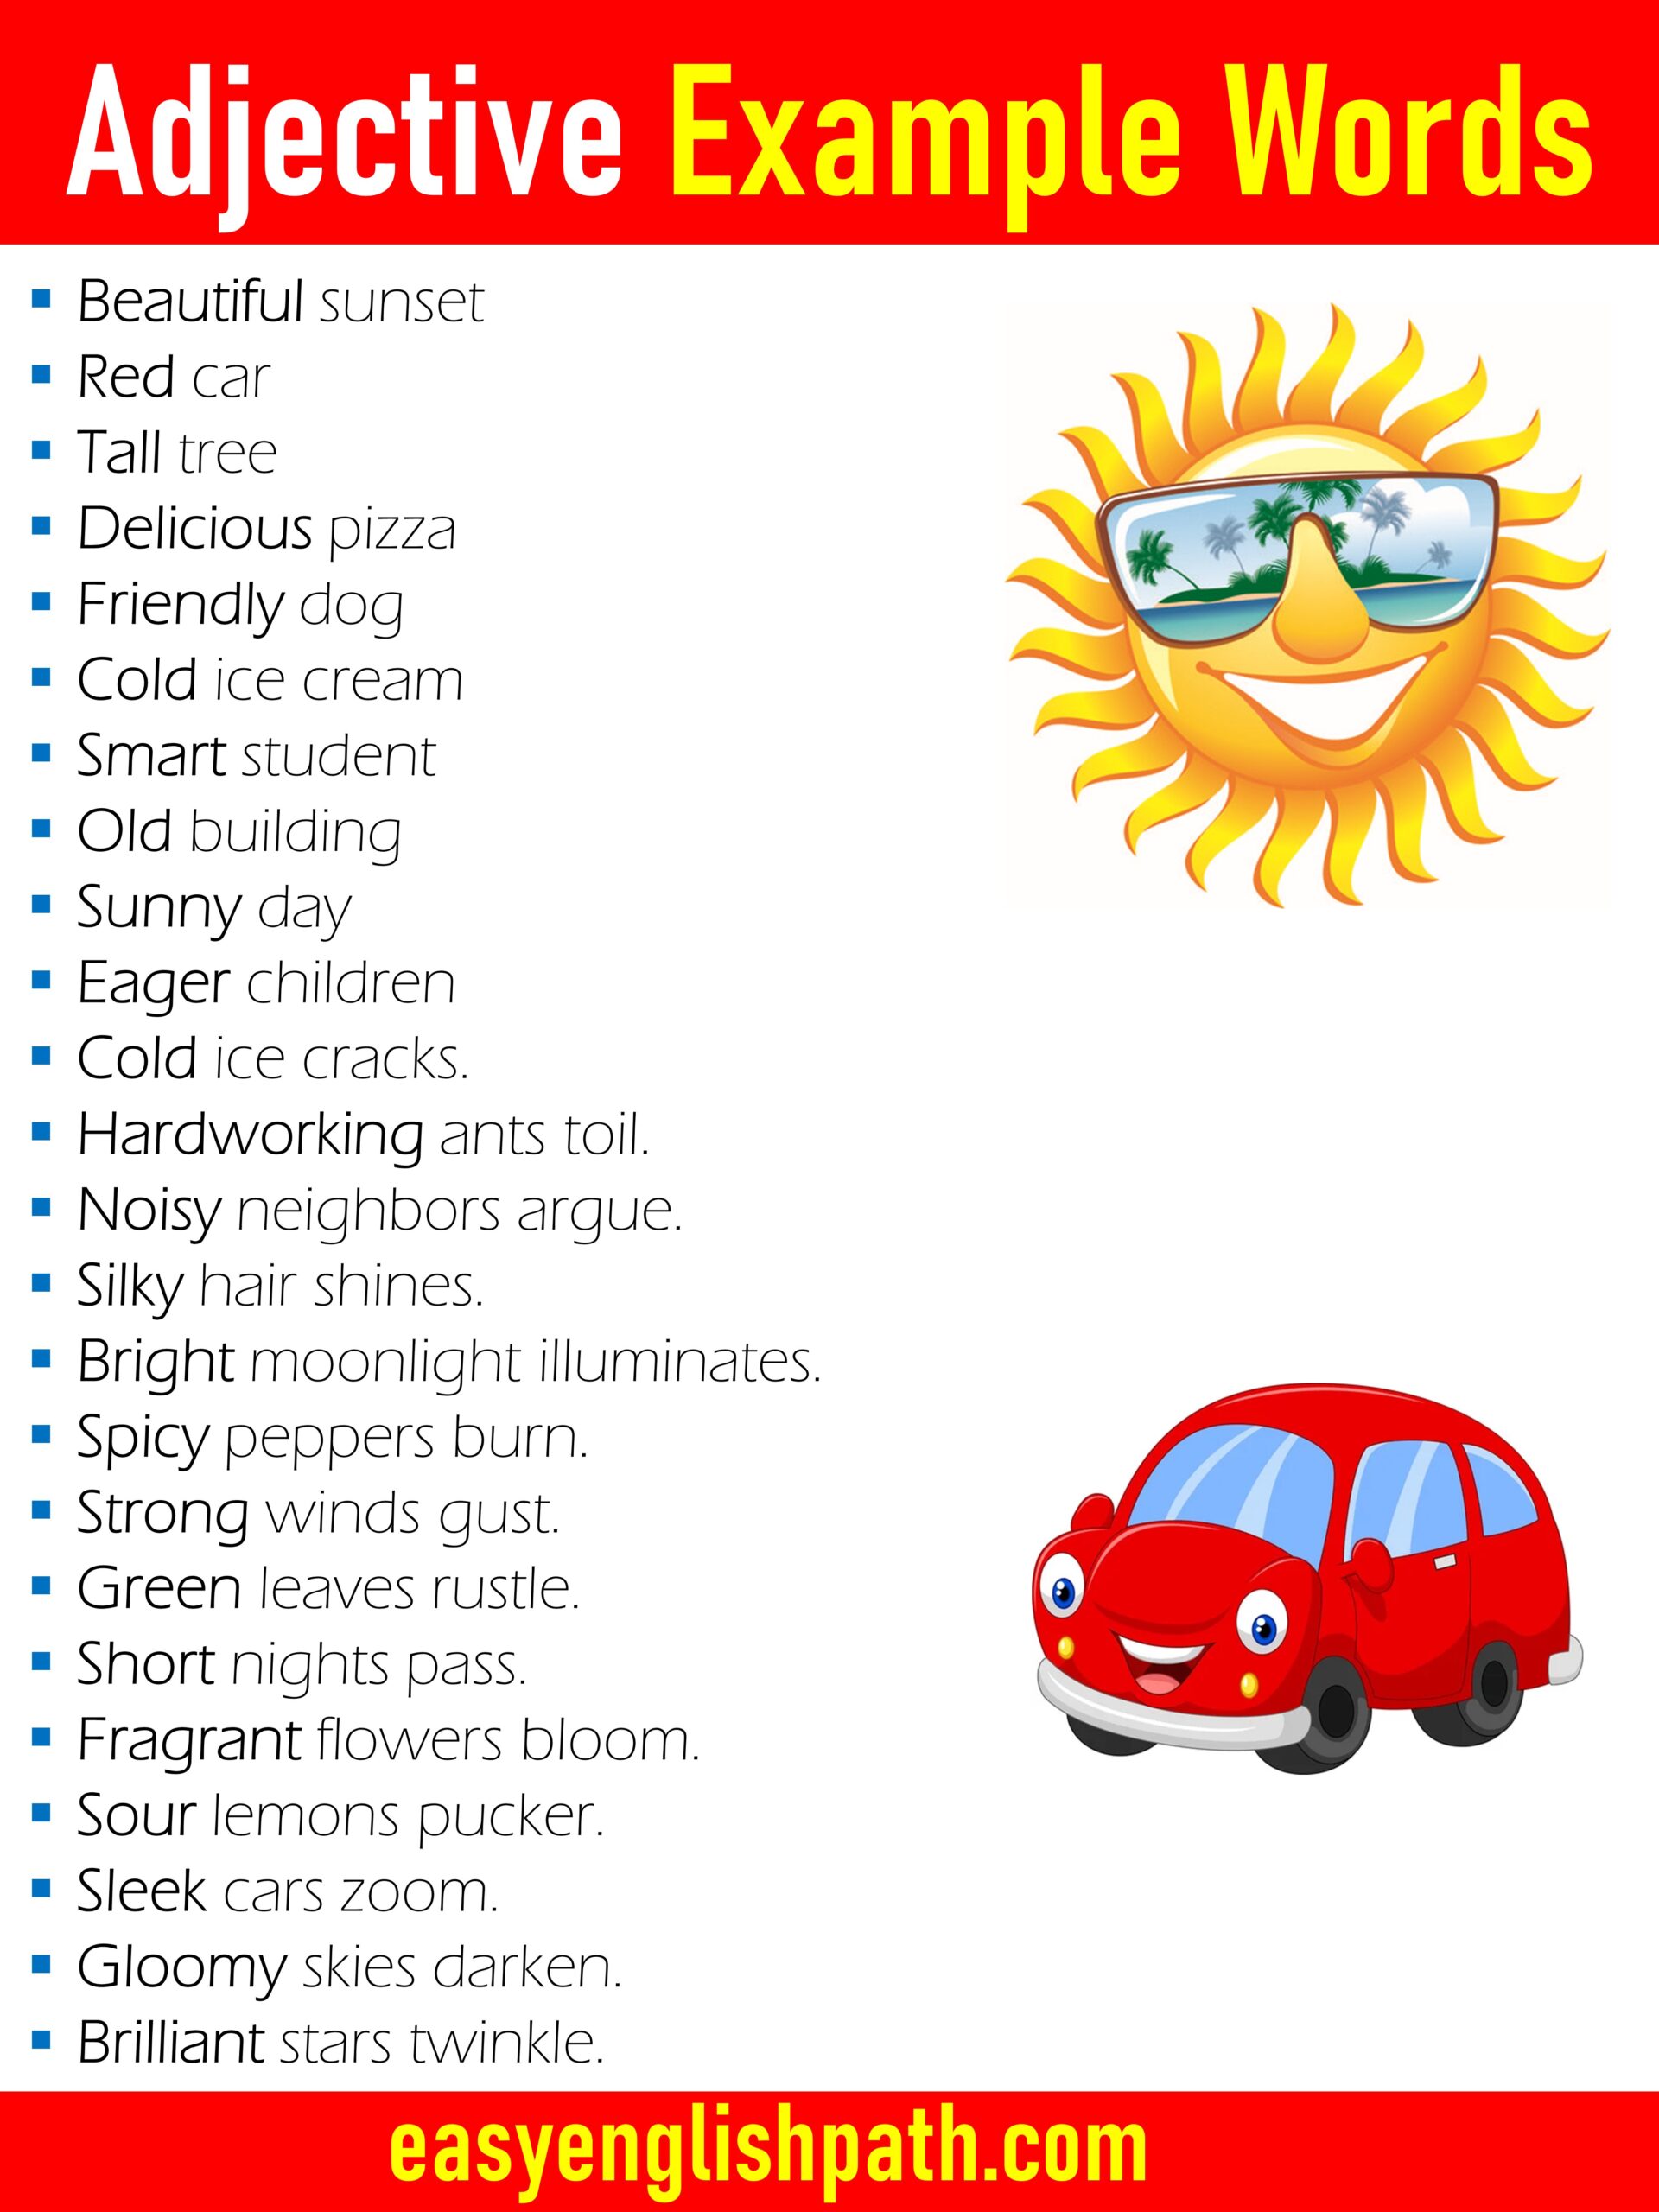 Adjective Example Words in English